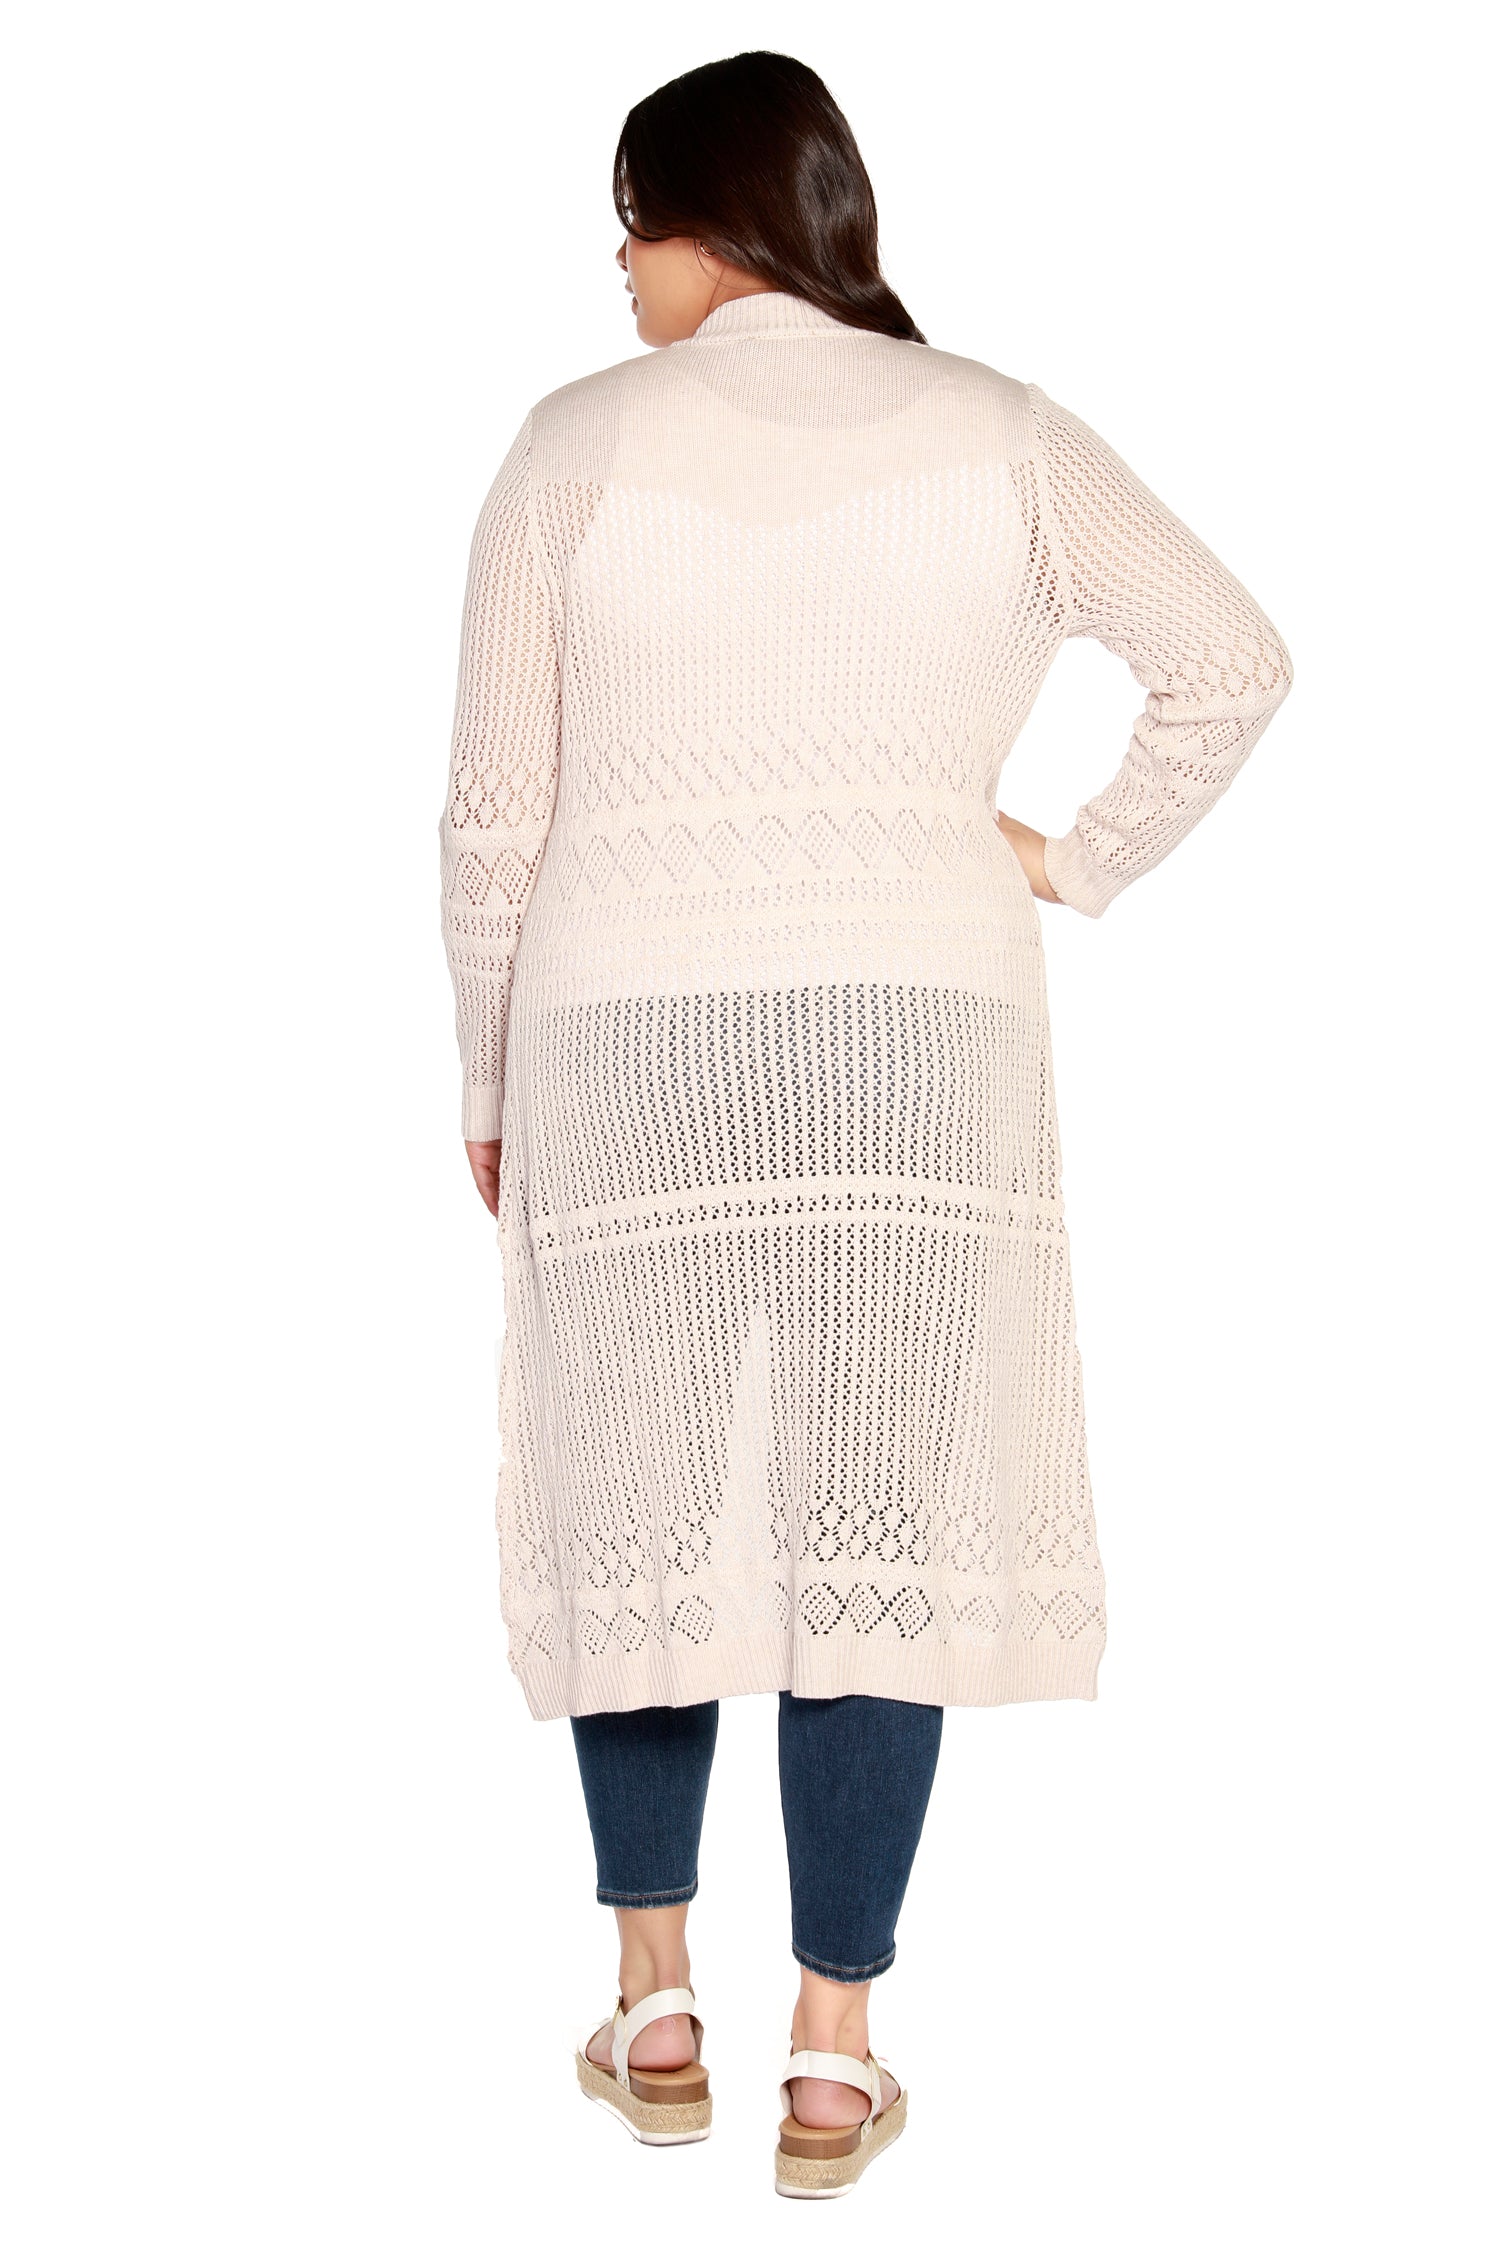 Women's Duster Cardigan in a Crochet Pointelle Stitch Long Sleeves and an Open Front  | Curvy